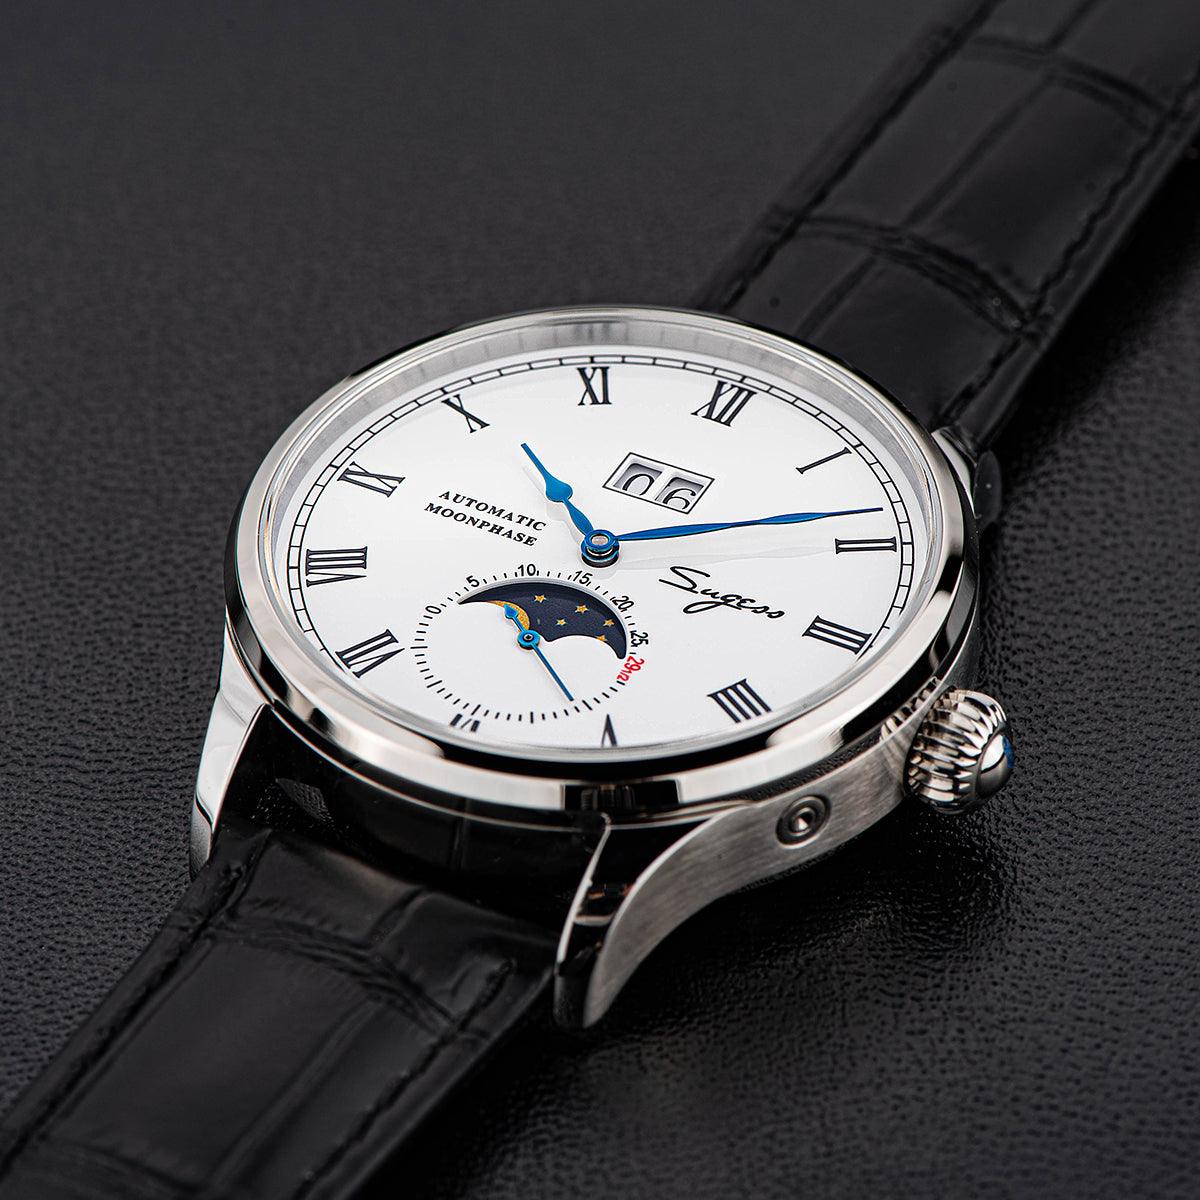 Sugess Automatic Moon Phase Men's Watch Stainless Steel Case with Seagull Movement, Business Elegance, and Enamel Dial - Murphy Johnson Watches Co.